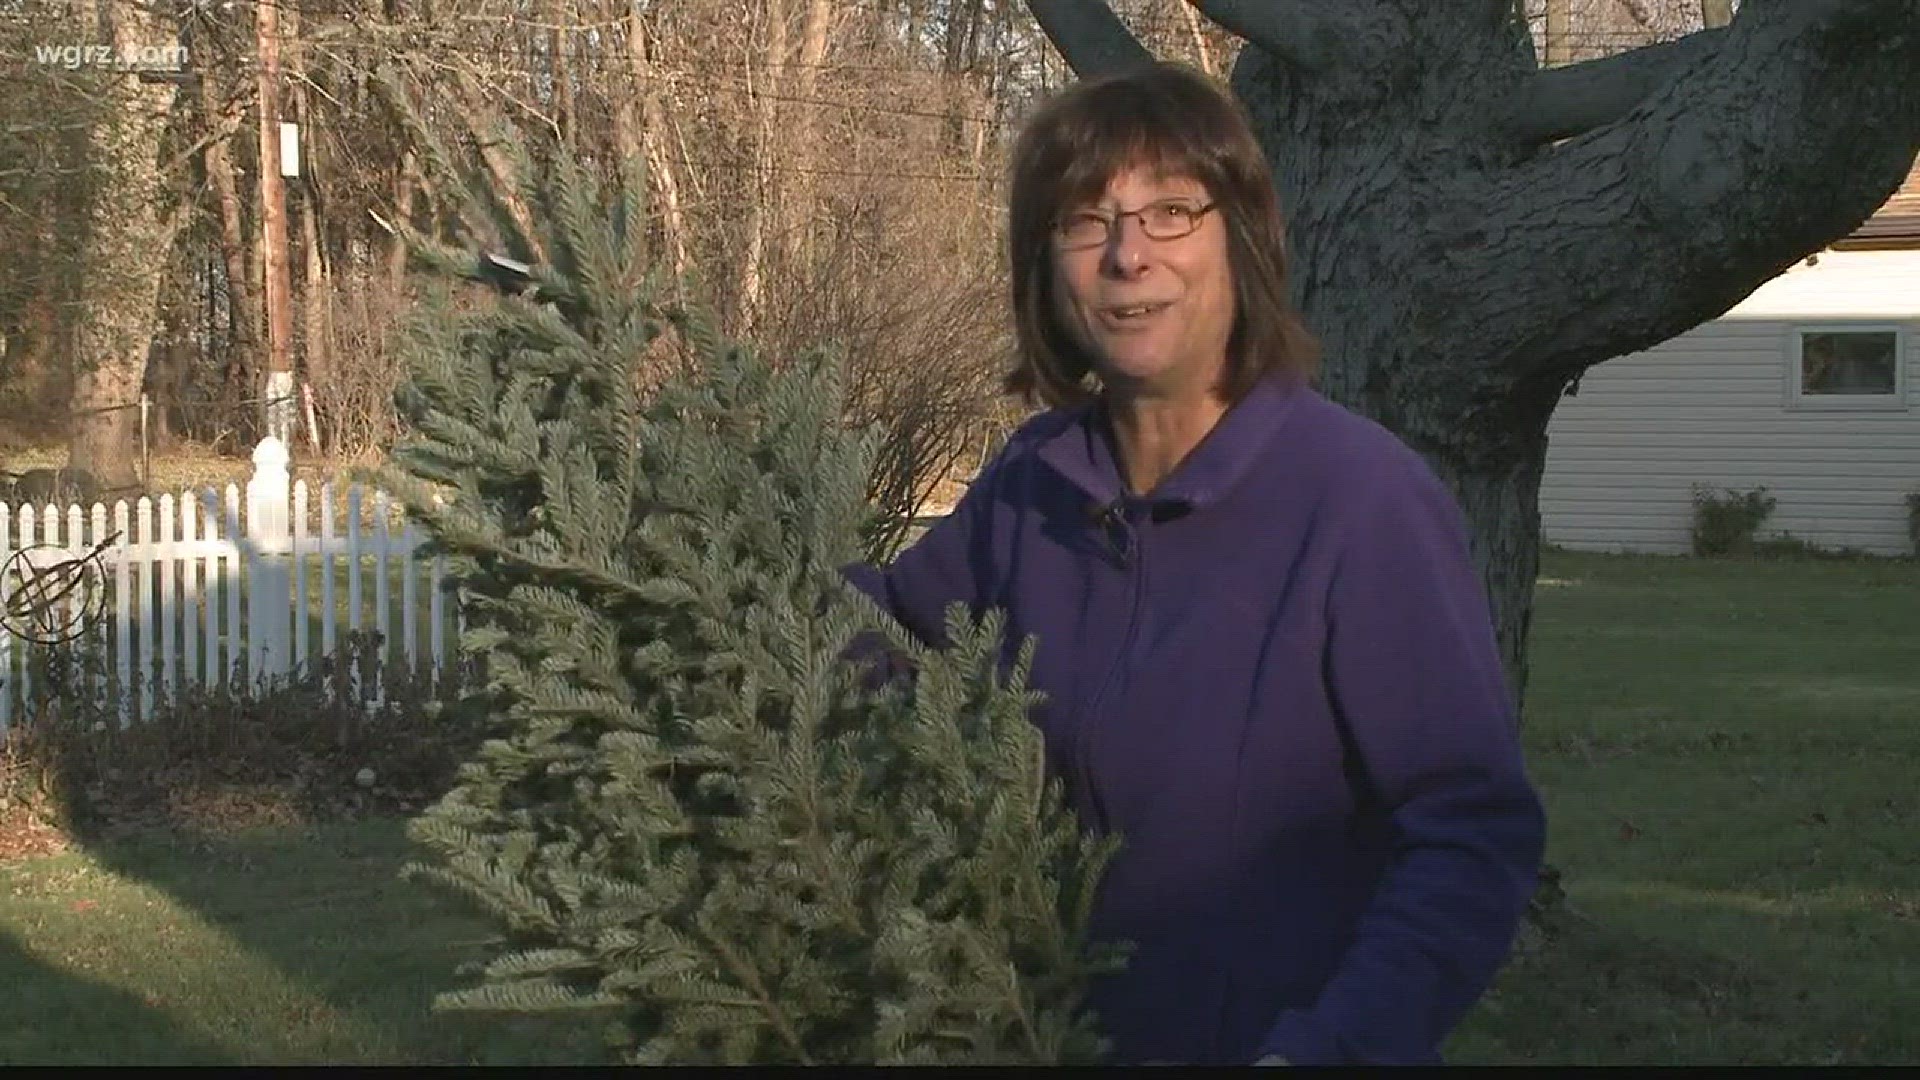 Jackie offers helpful Christmas tree tips in this week's 2 The Garden